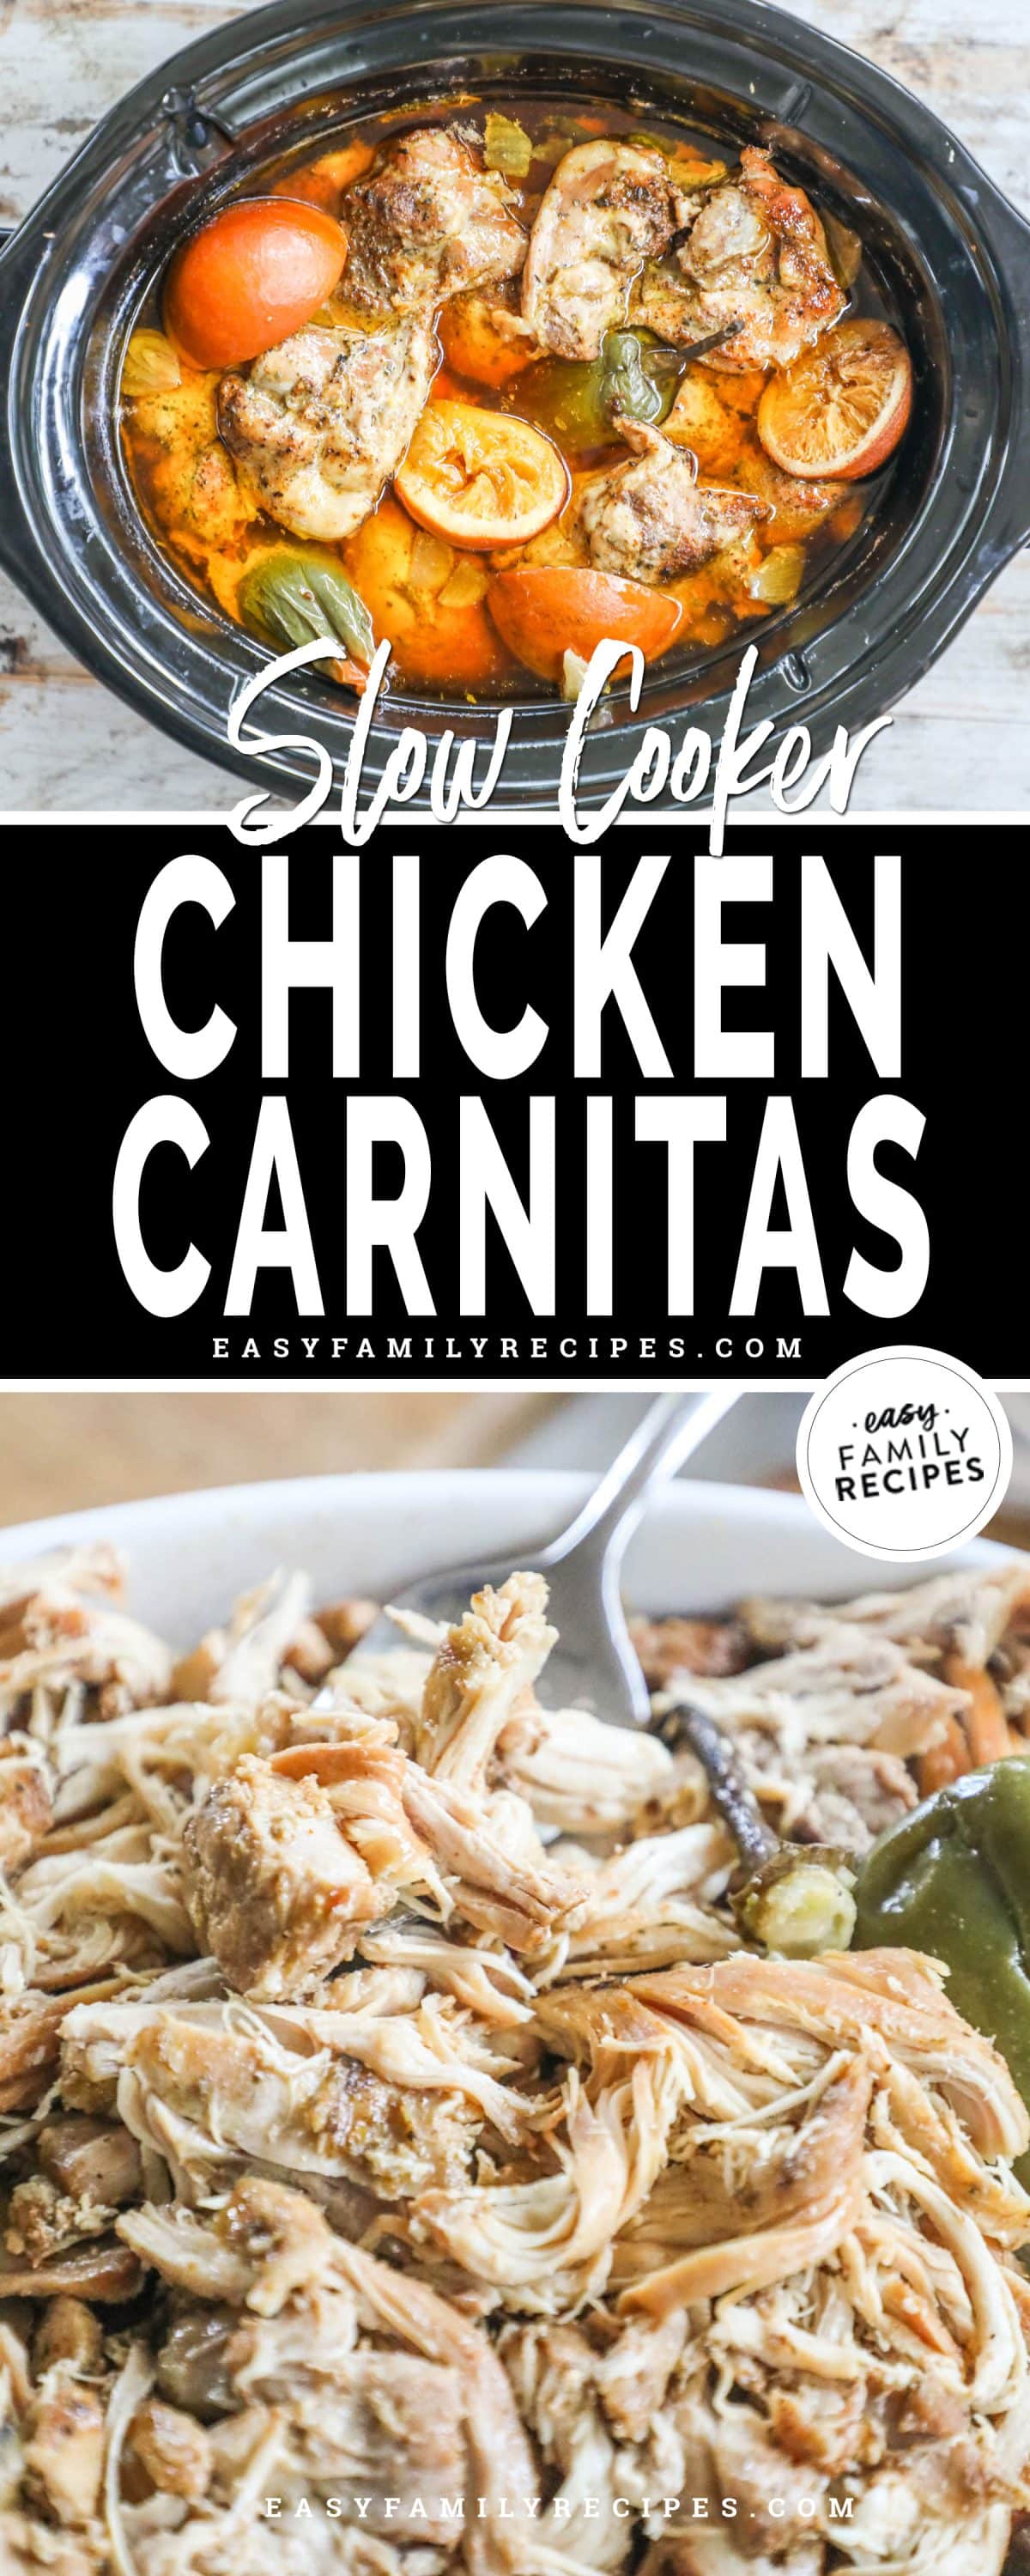 a slow cooker filled with chicken carnitas ingredients and a platter piled with finished chicken carnitas